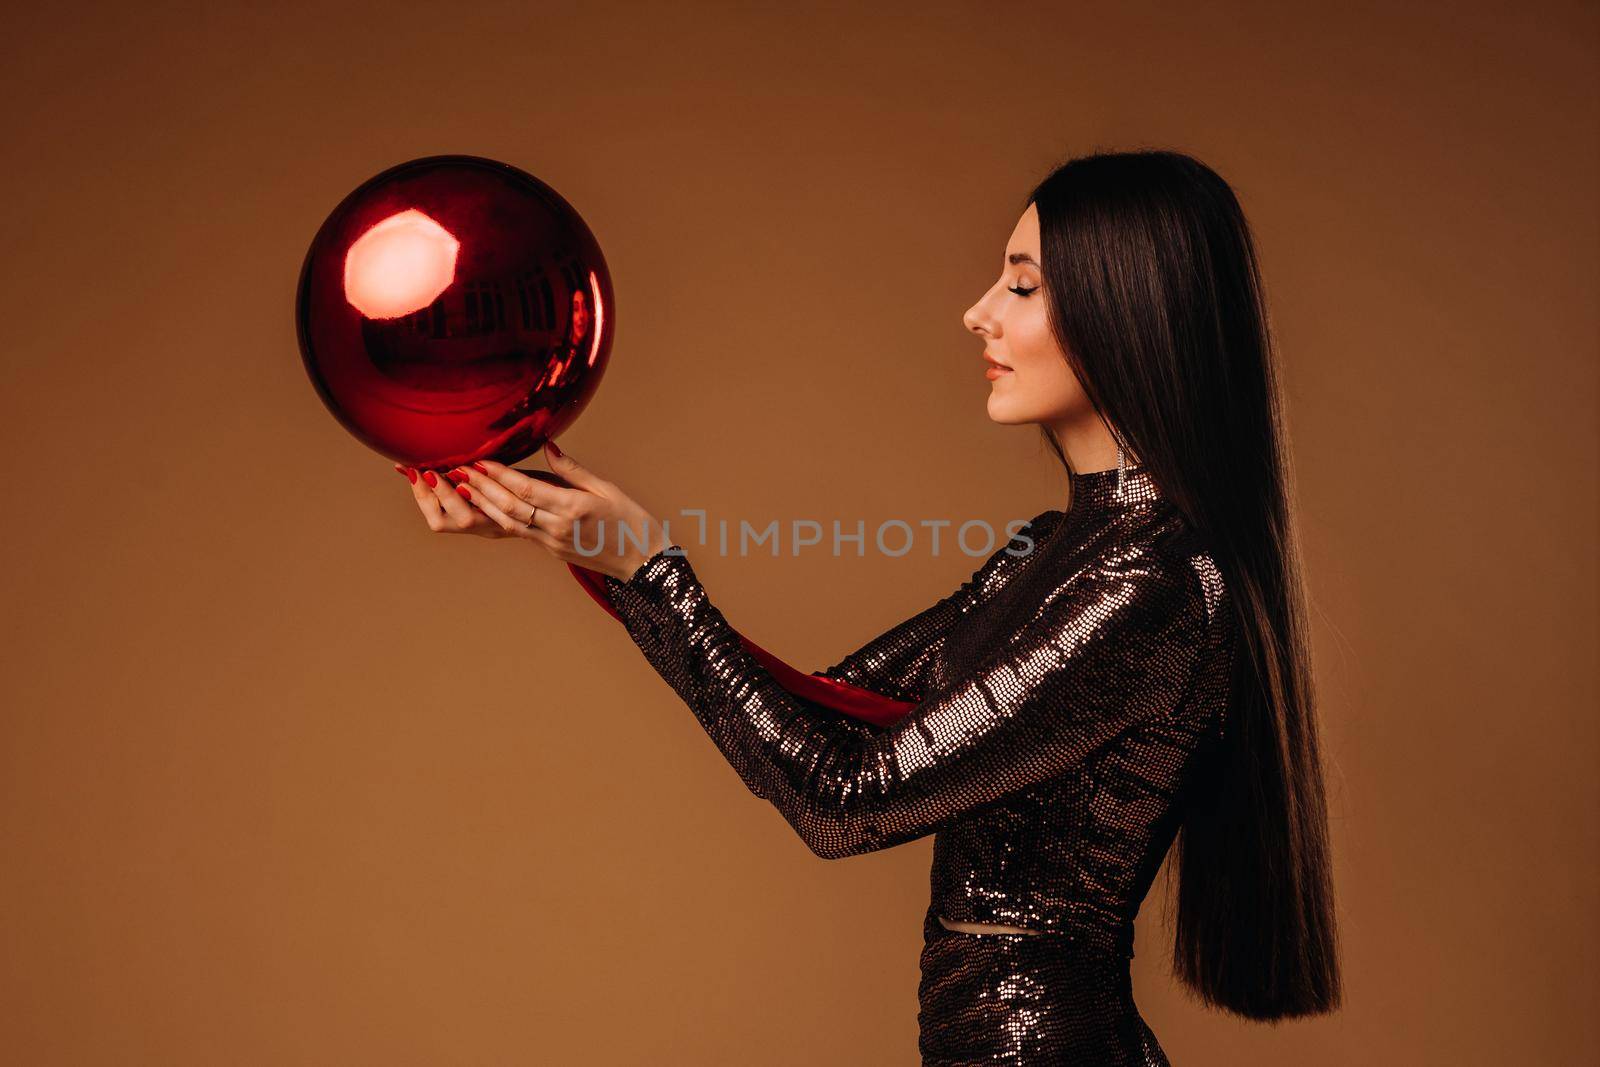 Girl with long hair in a shiny dress with a large Christmas ball on a brown background.